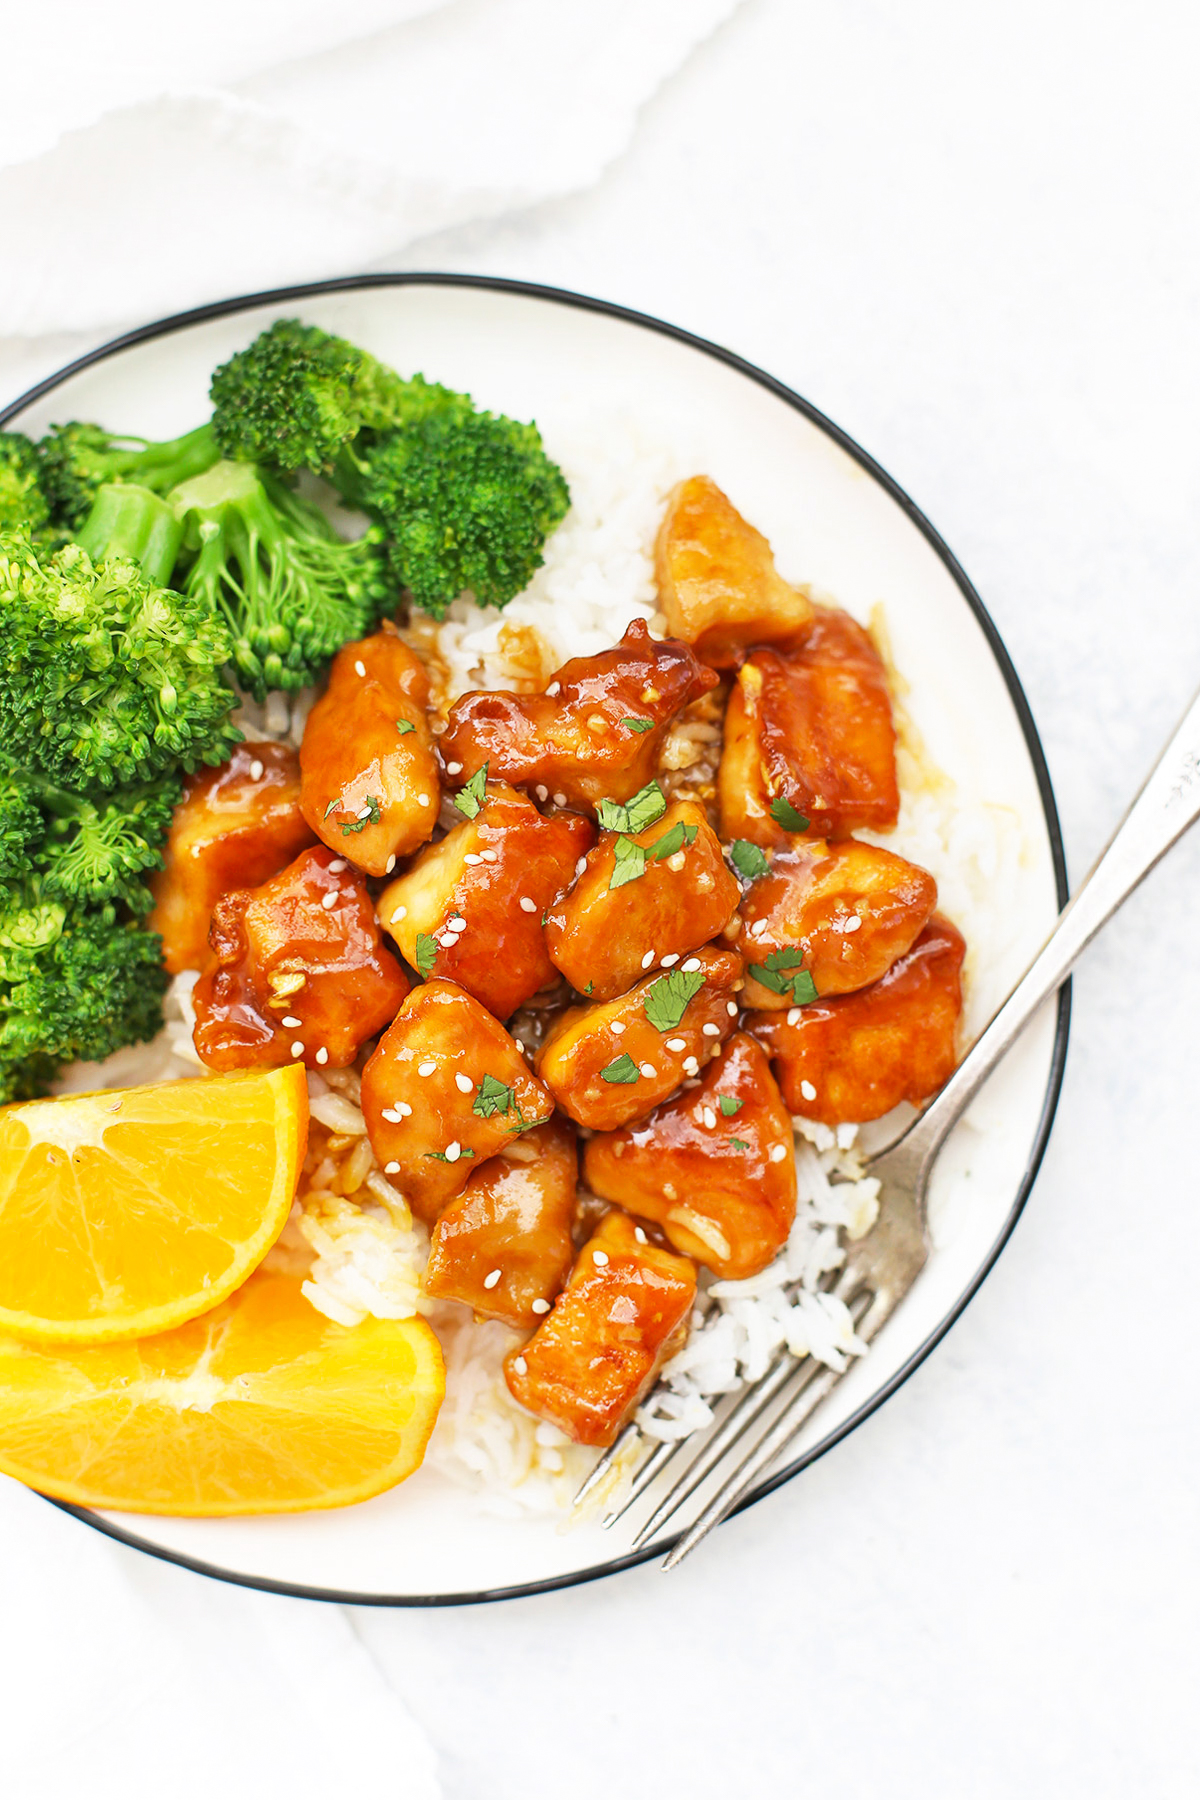 Close up Overhead view of a plate with healthy orange chicken, rice, orange wedges and steamed broccoli on a white background